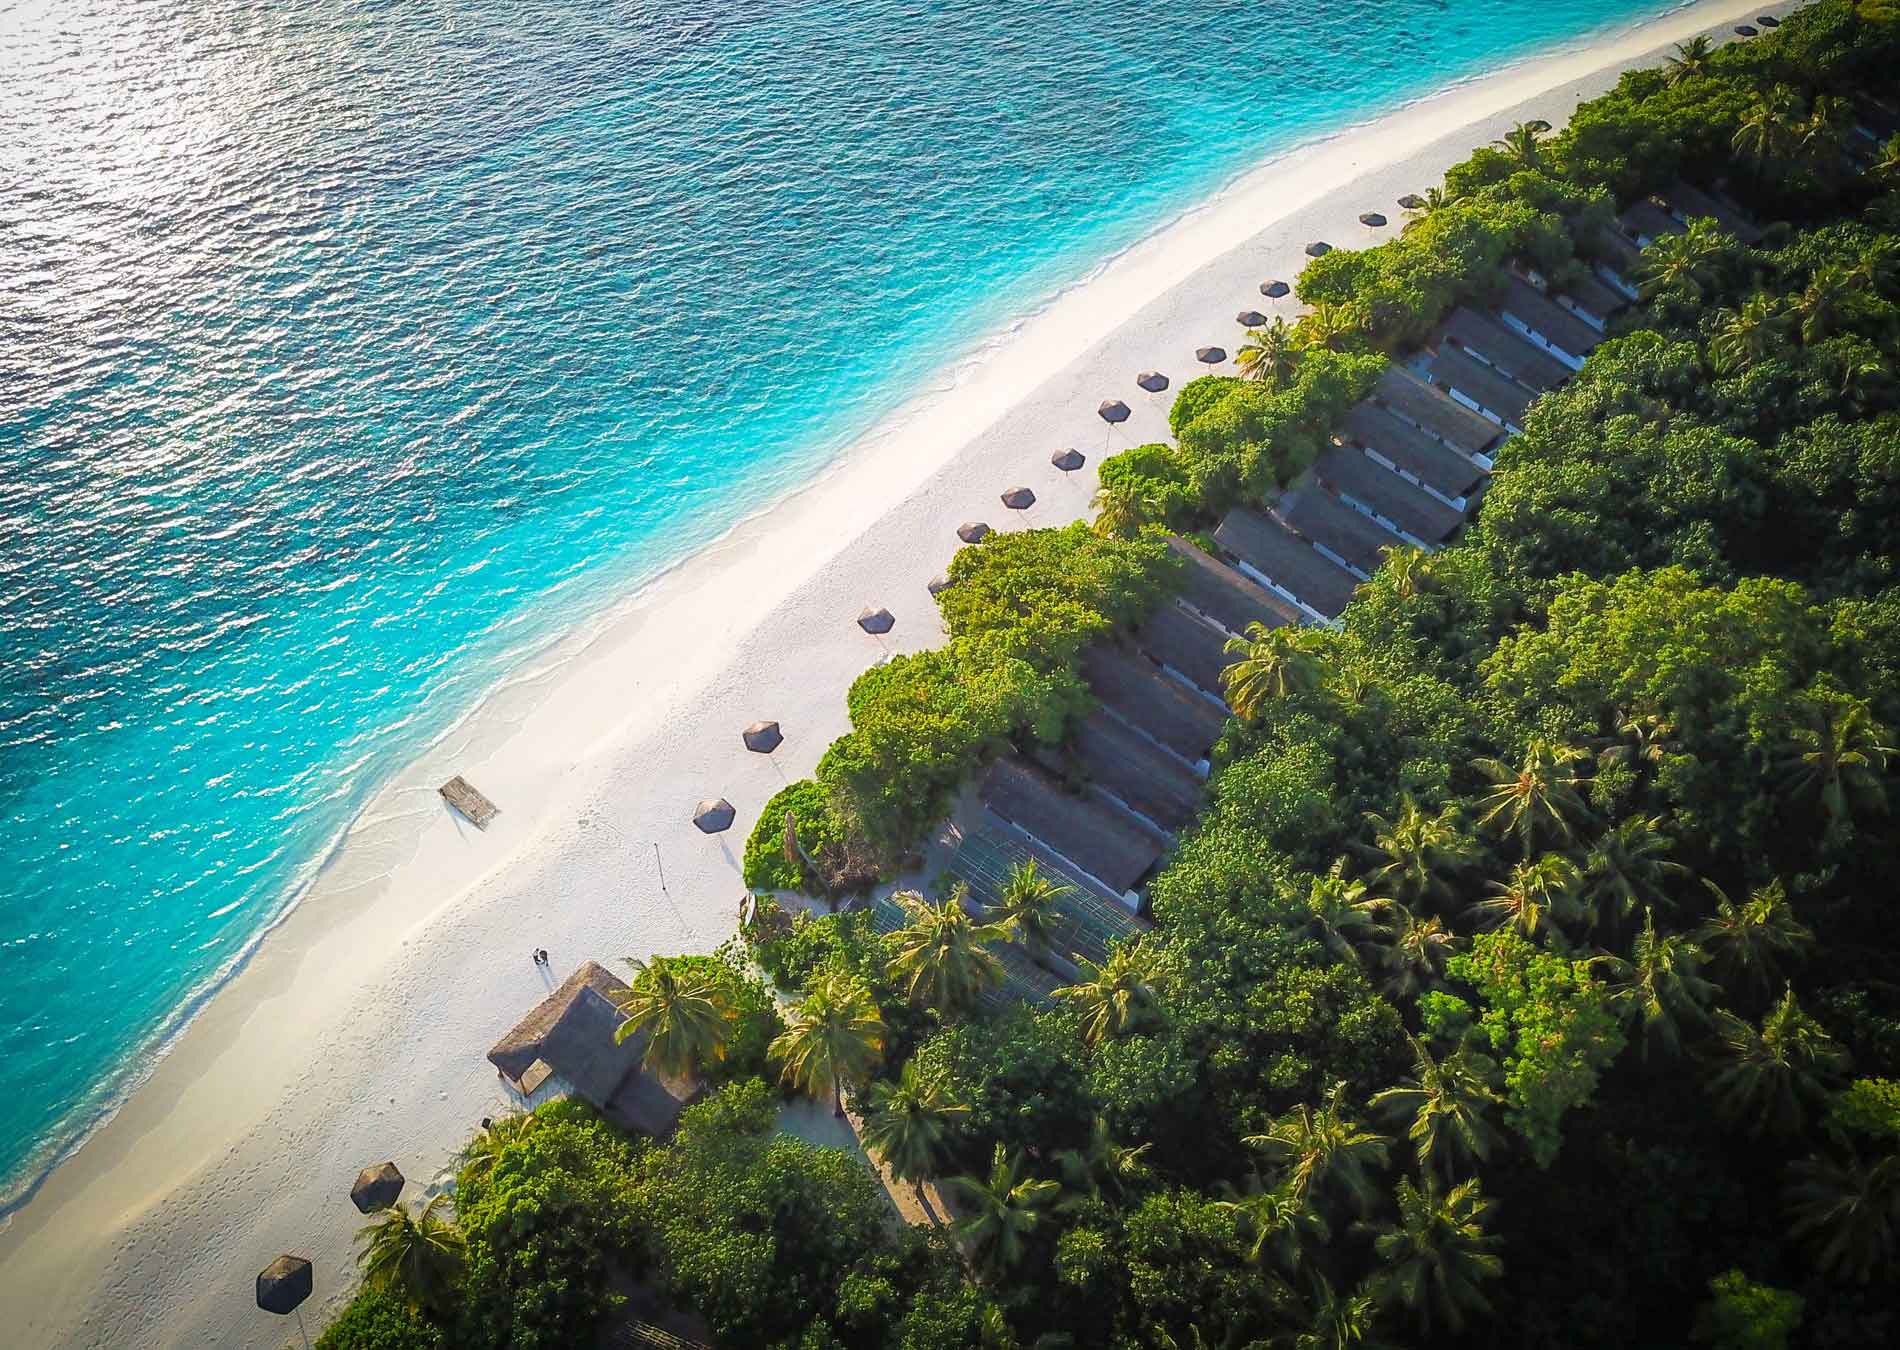 Reethi Beach In Maldives Is A Paradise On Earth!